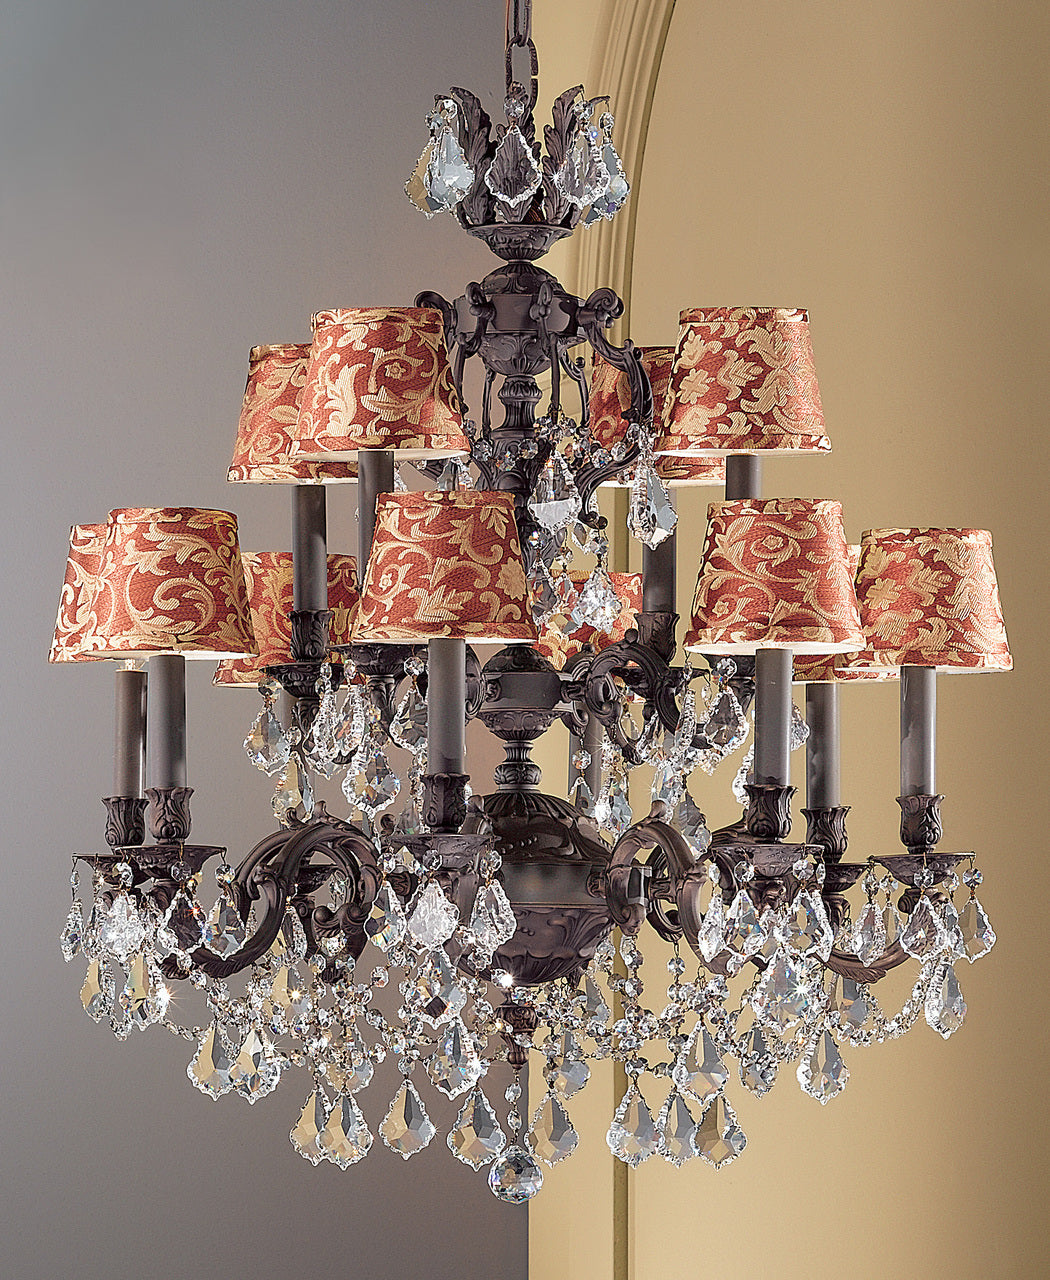 Classic Lighting 57389 AGP S Chateau Imperial Crystal Chandelier in Aged Pewter (Imported from Spain)